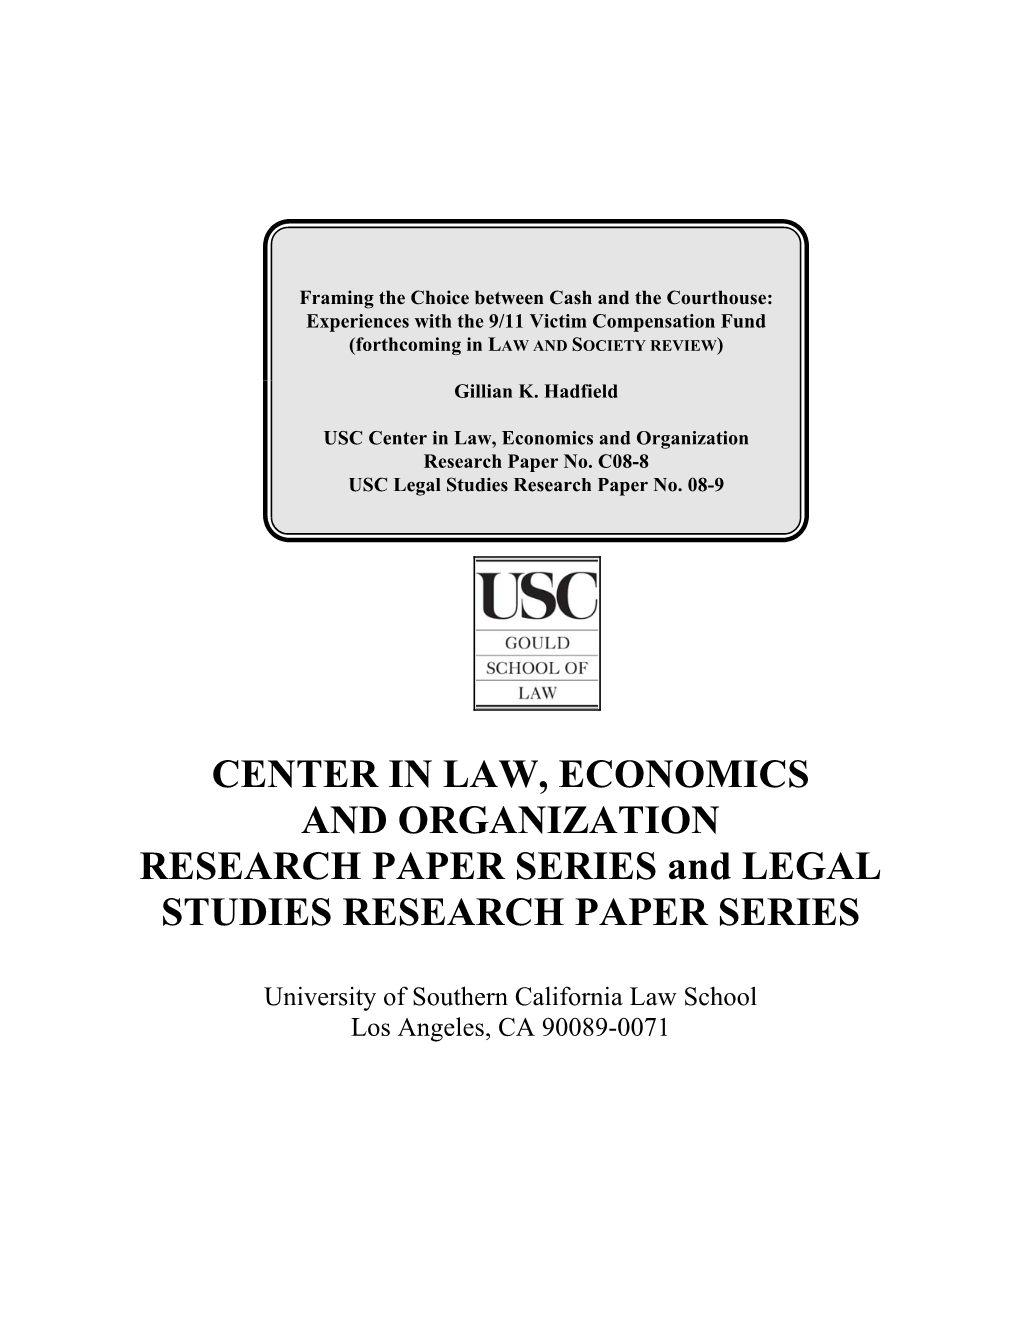 Experiences with the 9/11 Victim Compensation Fund (Forthcoming in LAW and SOCIETY REVIEW)